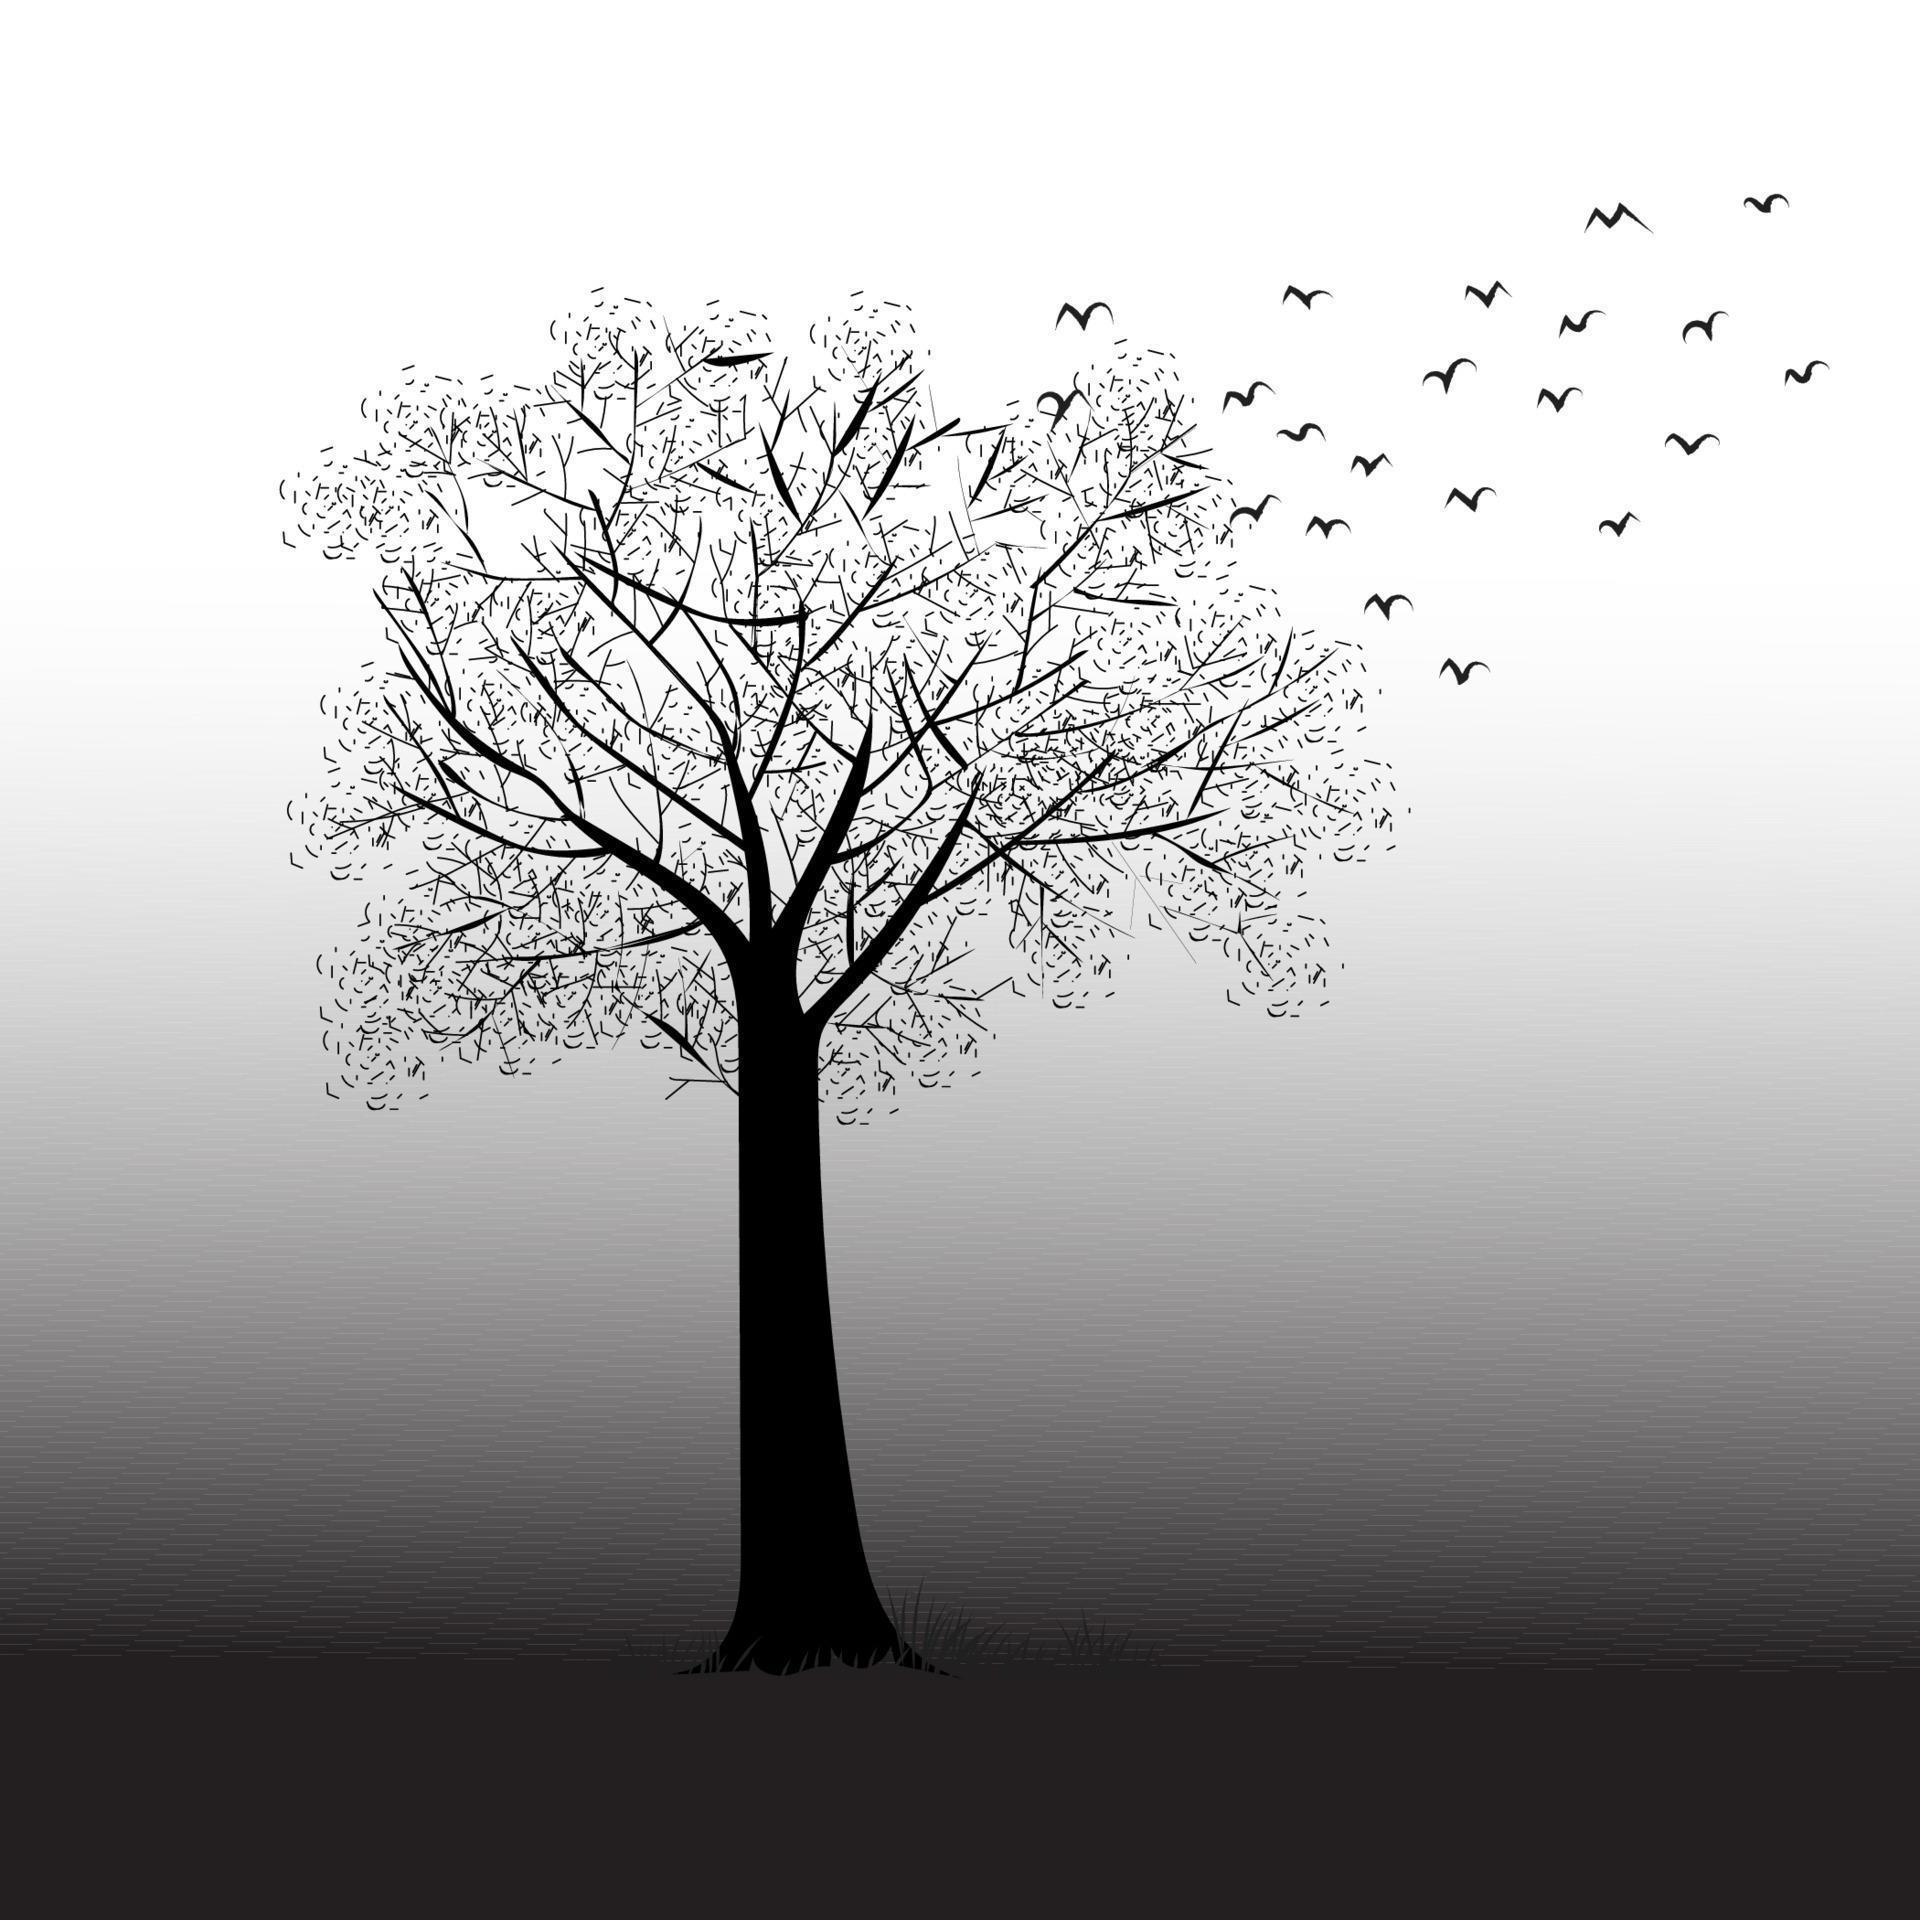 Hand drawn trees sketch landscape black and white vector illustration ...